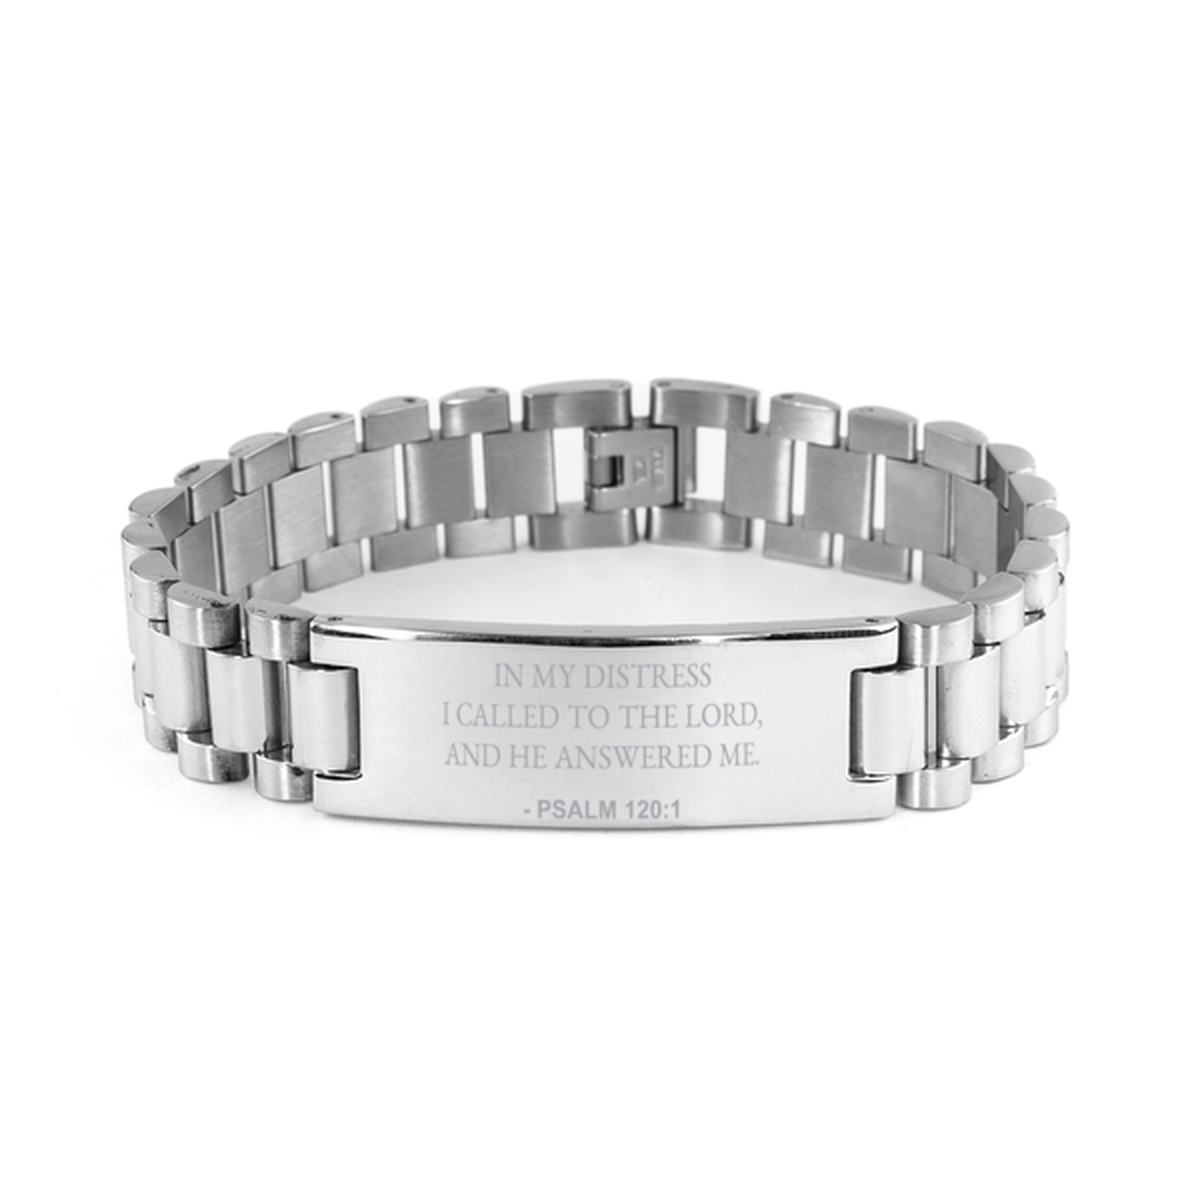 Christian Ladder Stainless Steel Bracelet, Psalm 120:1 In My Distress I Called To The Lord, And He, Motivational Bible Verse Gifts For Men Women